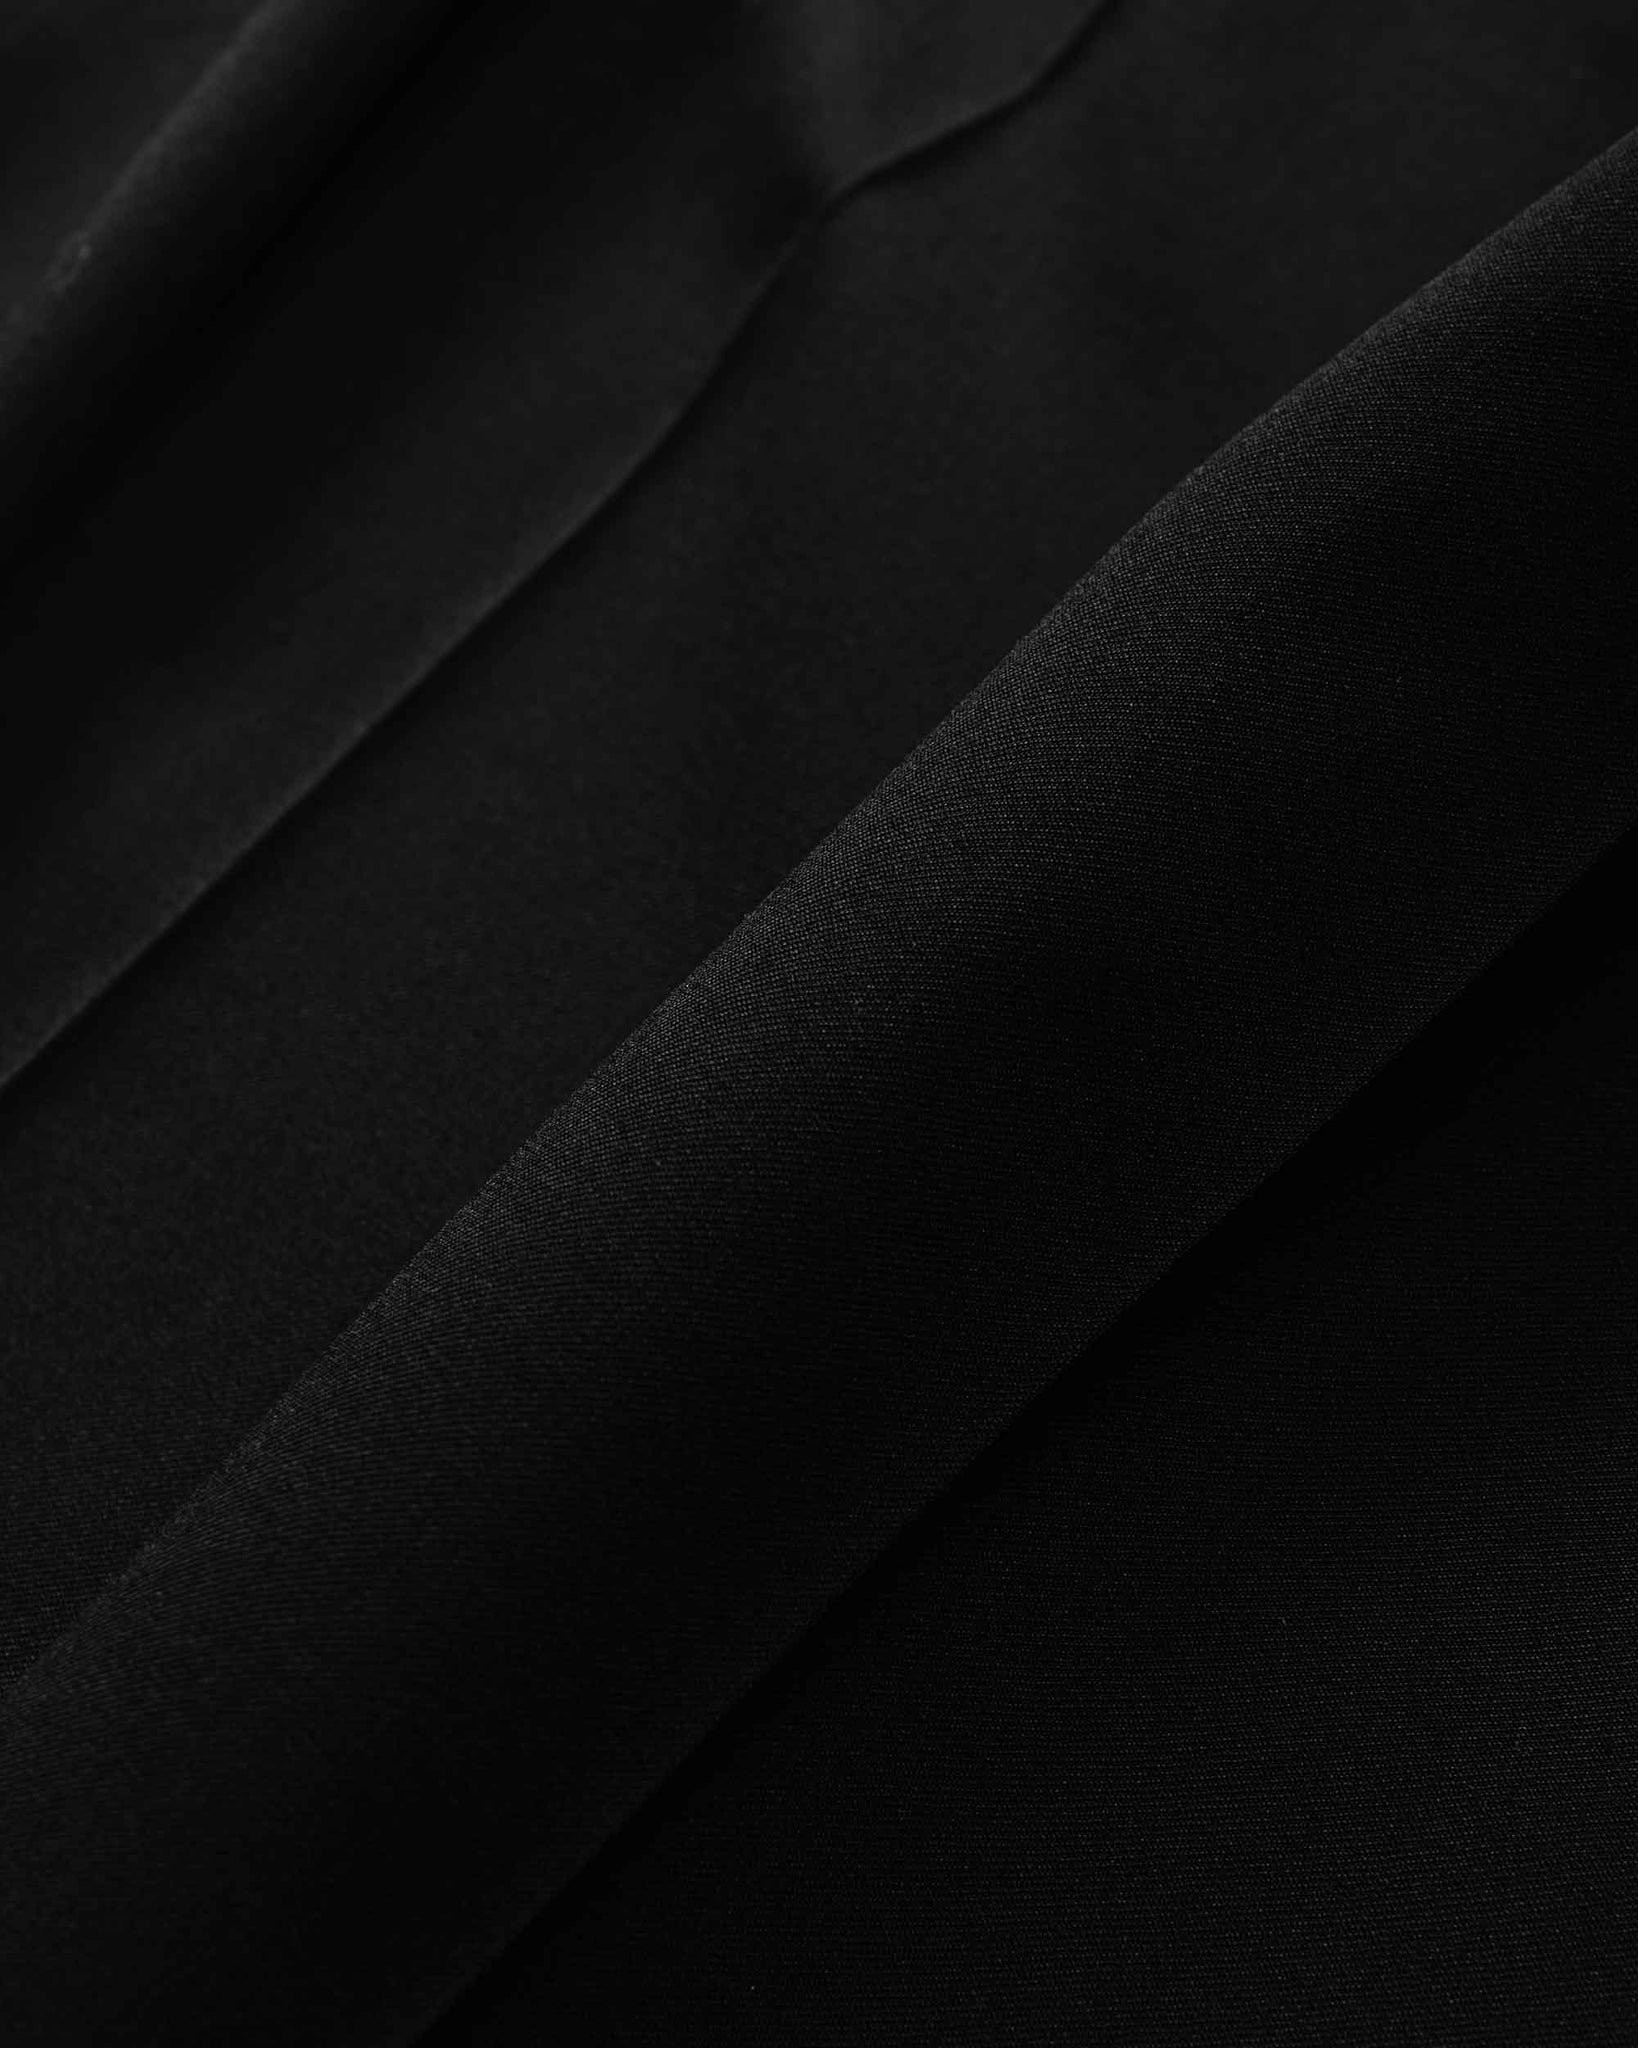 Our Legacy Chino 22 Black Worsted Wool Fabric